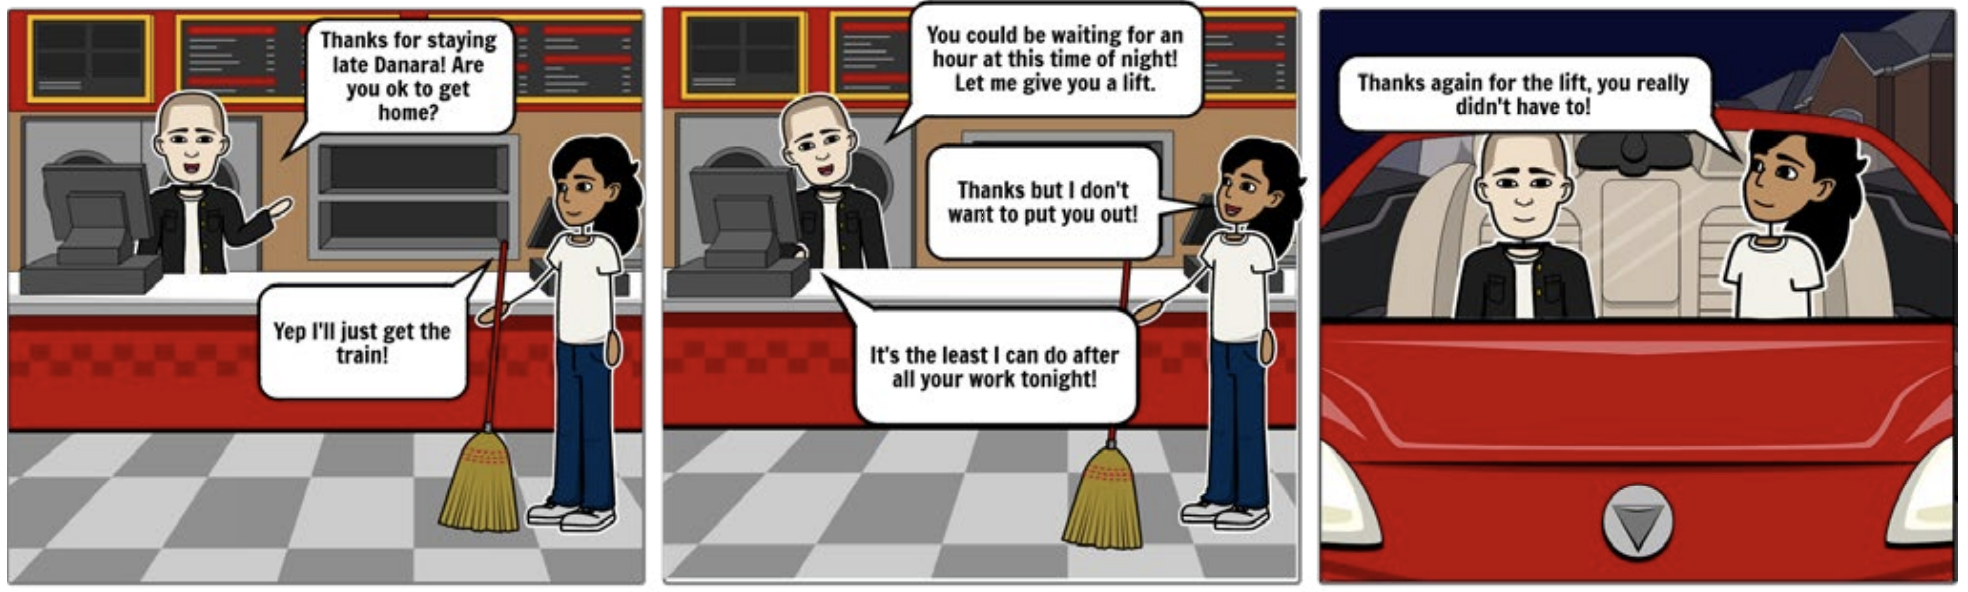 A comic strip depicting two people at a fast food restaurant. The text reads 'Thanks for staying late Danara! Are you okay to get home?'. 'Yep I'll just get the train!'